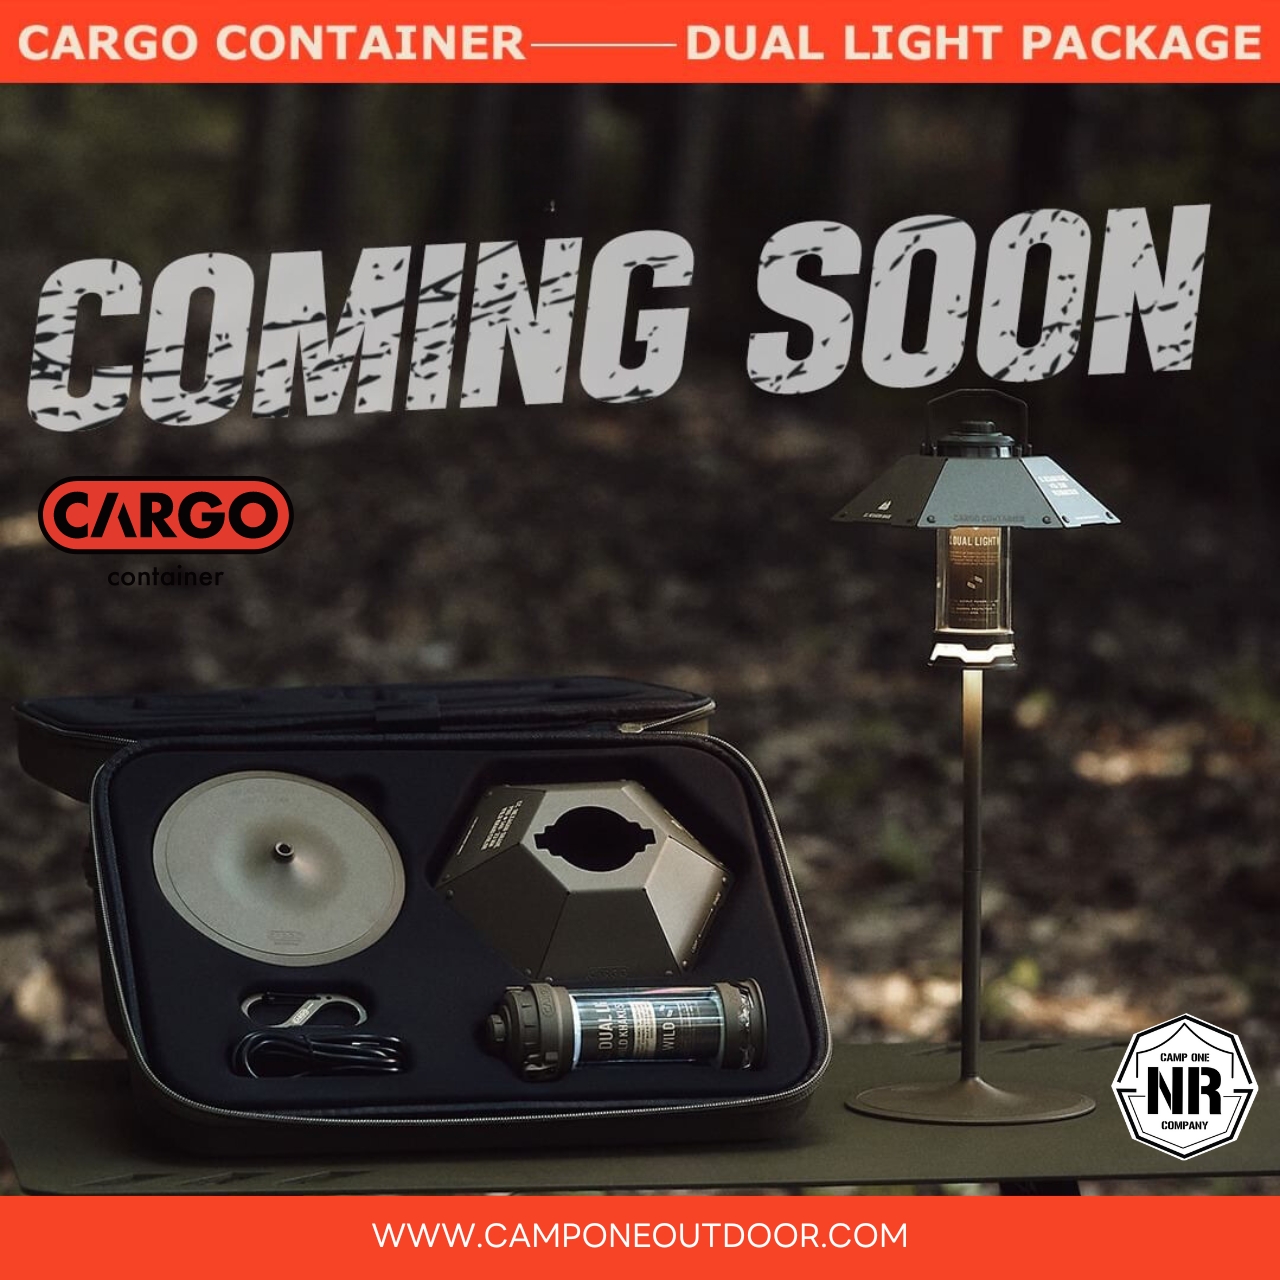 CARGO CONTAINER DUAL LIGHT PACKAGE